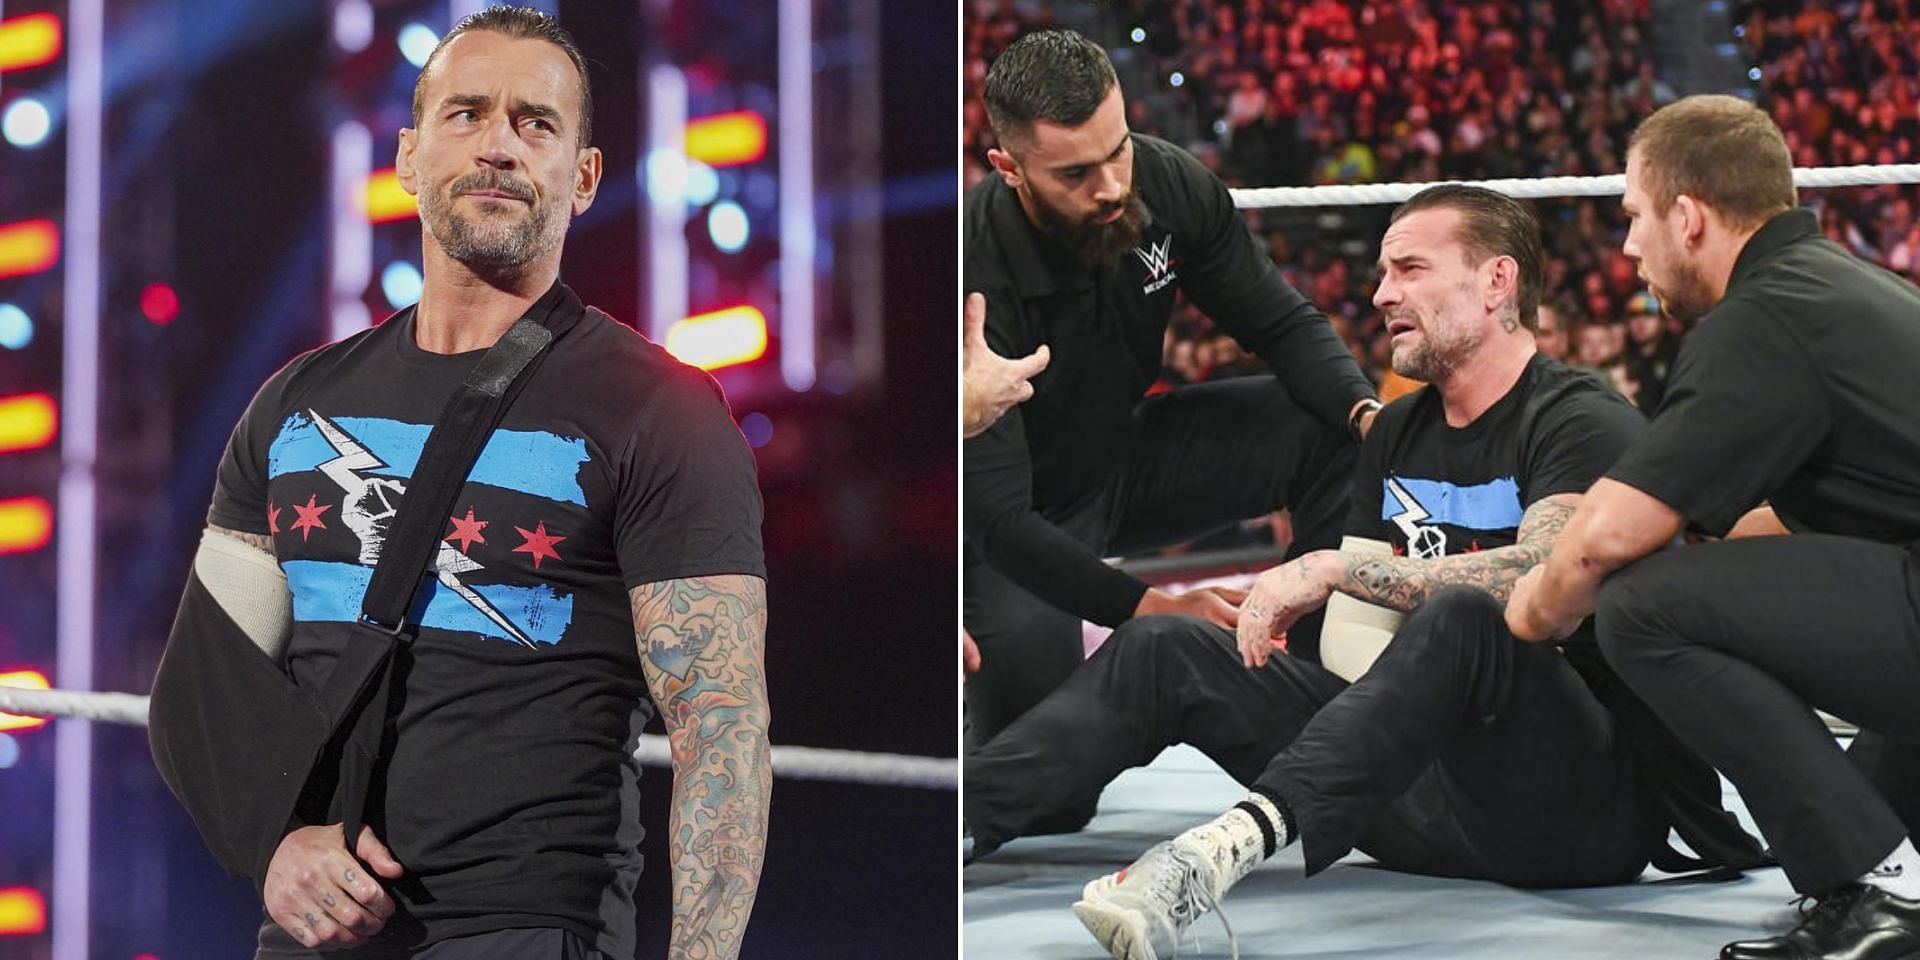 CM Punk is currently out of action